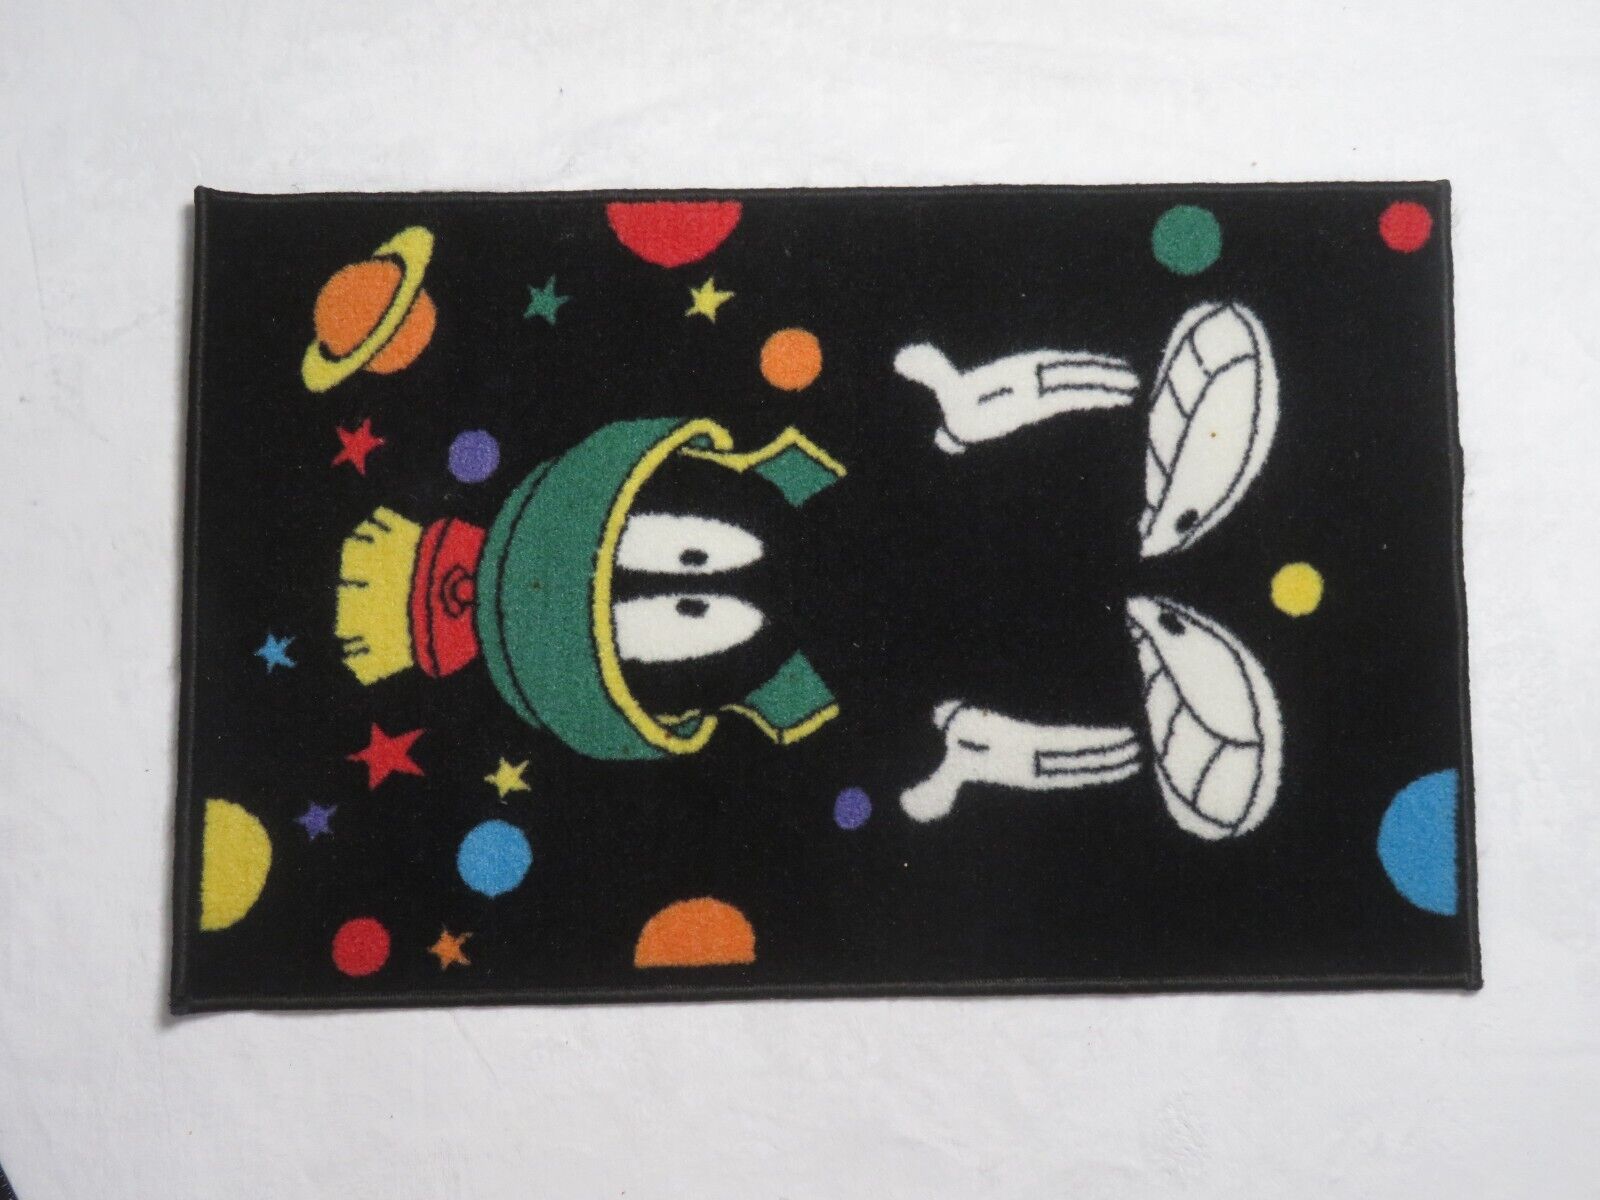 Vintage 1995 Marvin The Martian Looney Tunes Rug 22x35 Inches Pre Owned 90s Rare